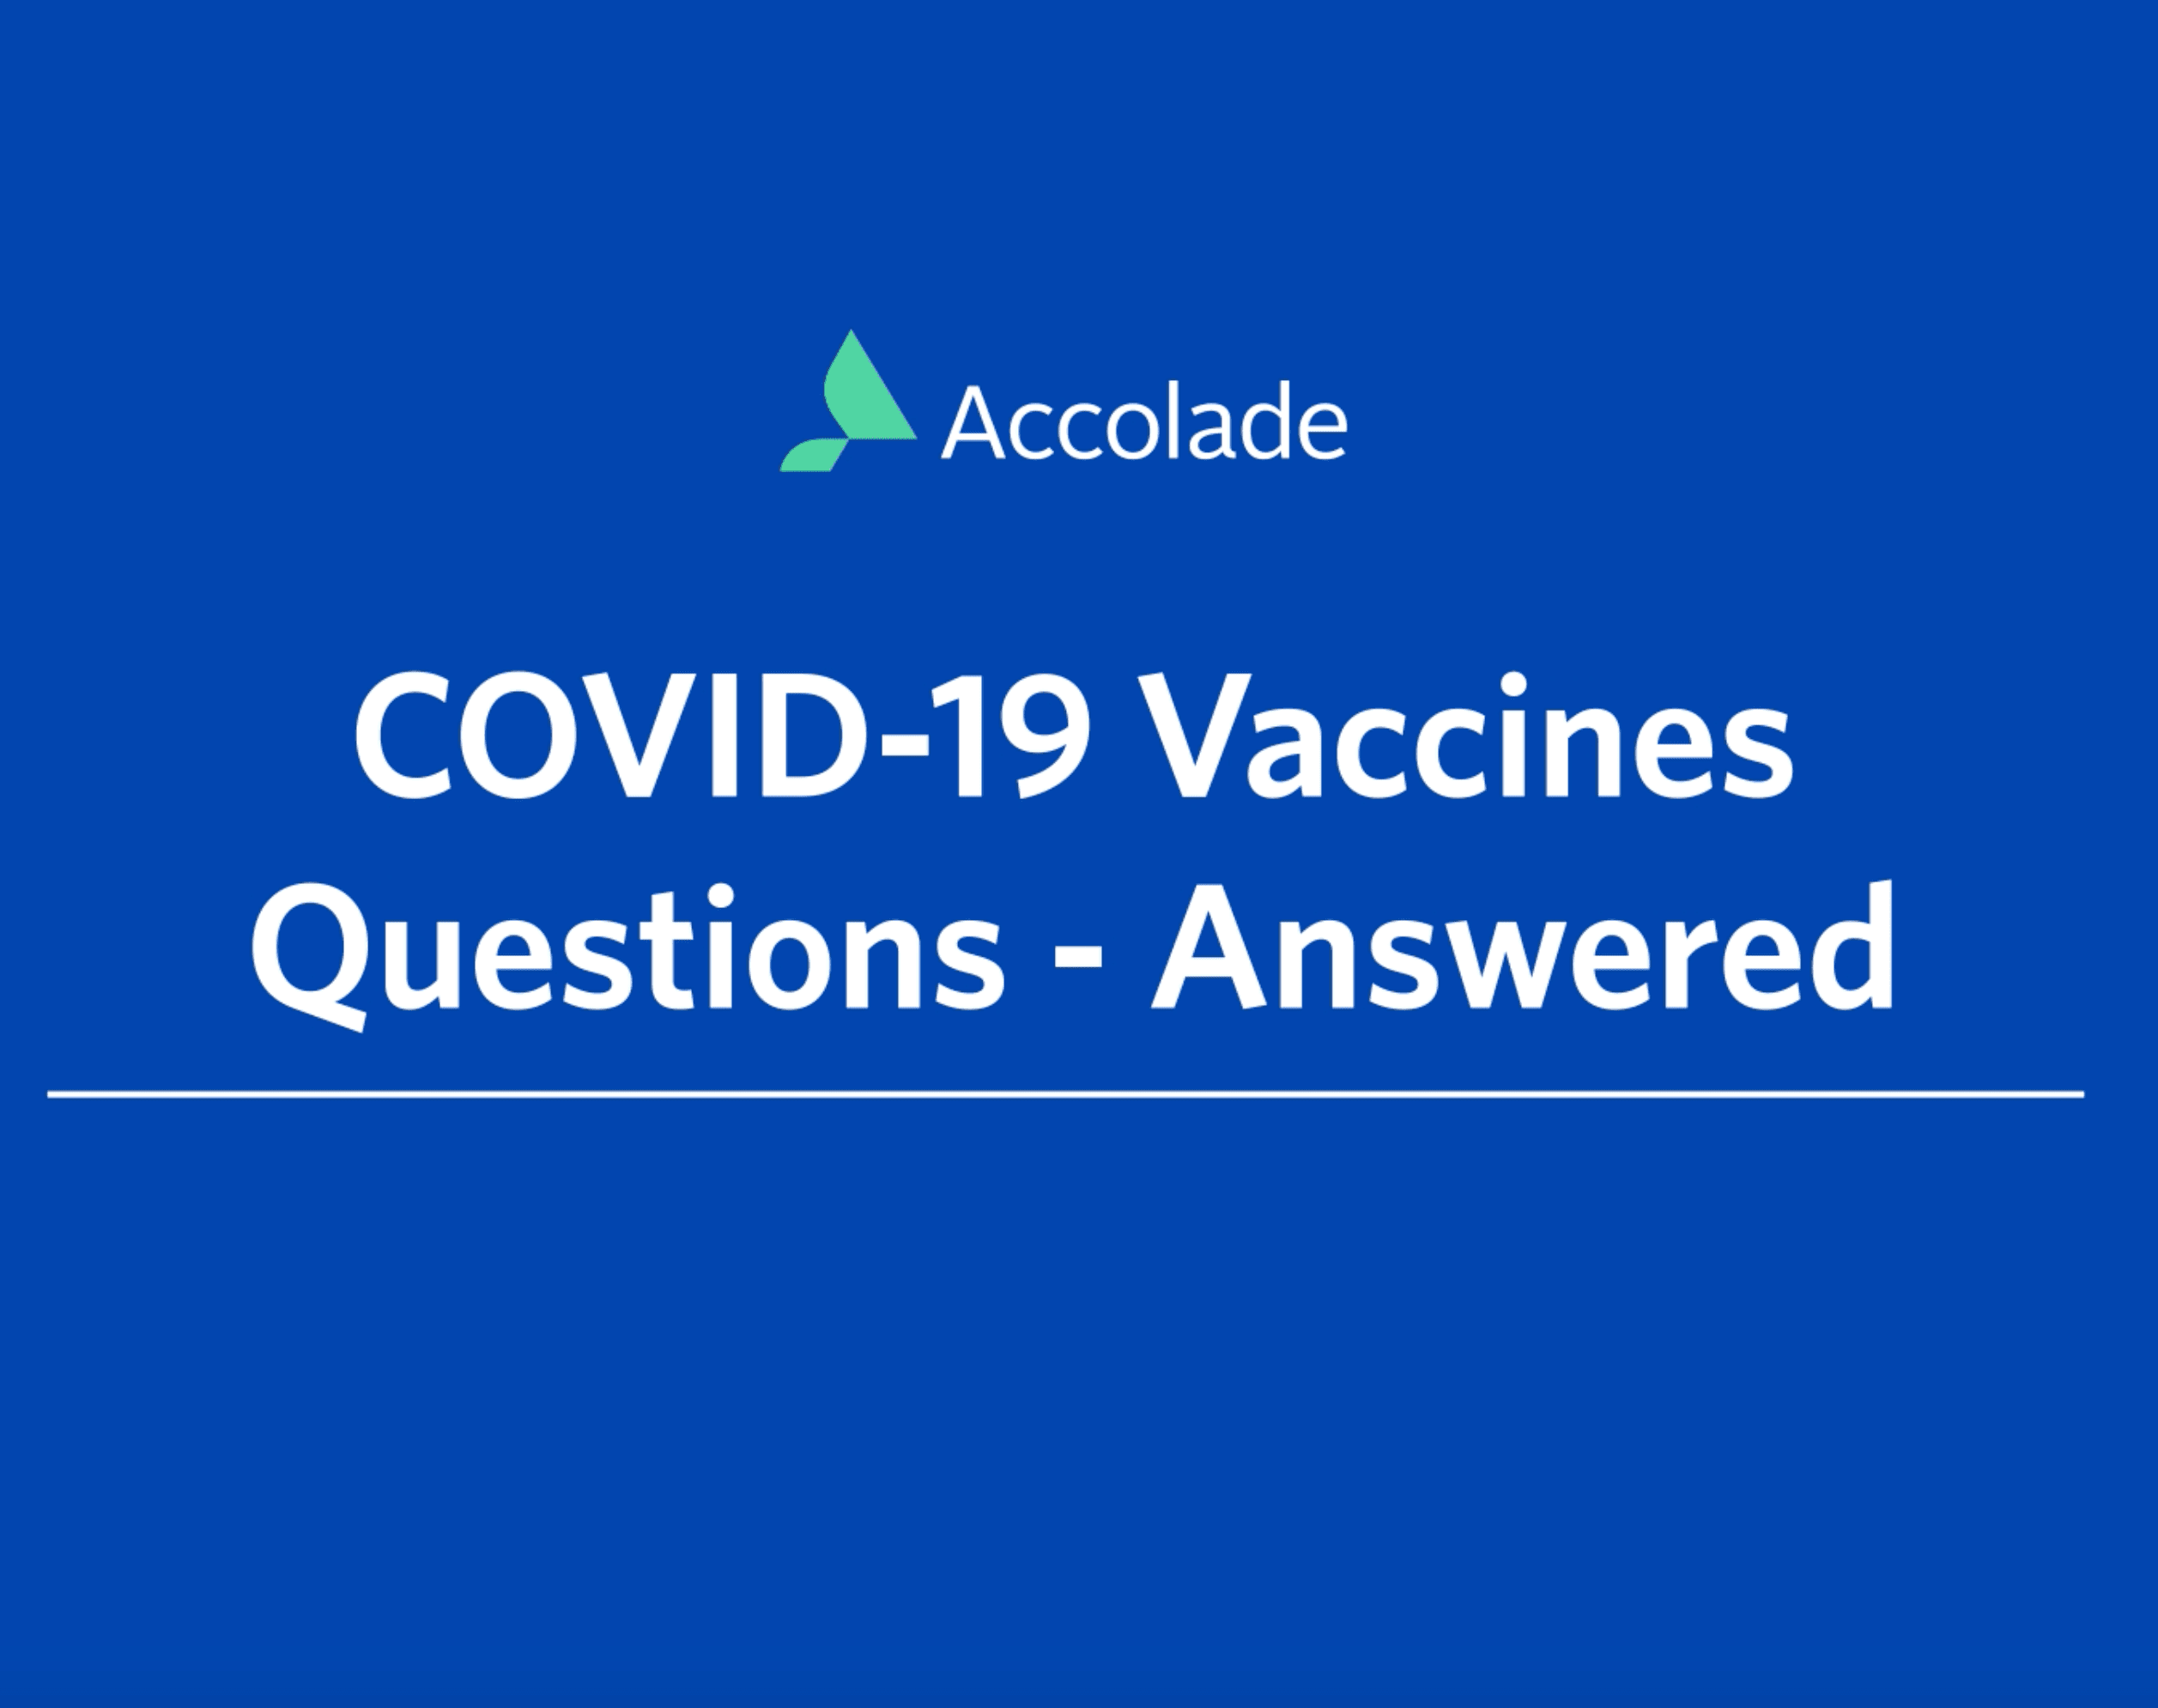 Combat skepticism about COVID vaccines